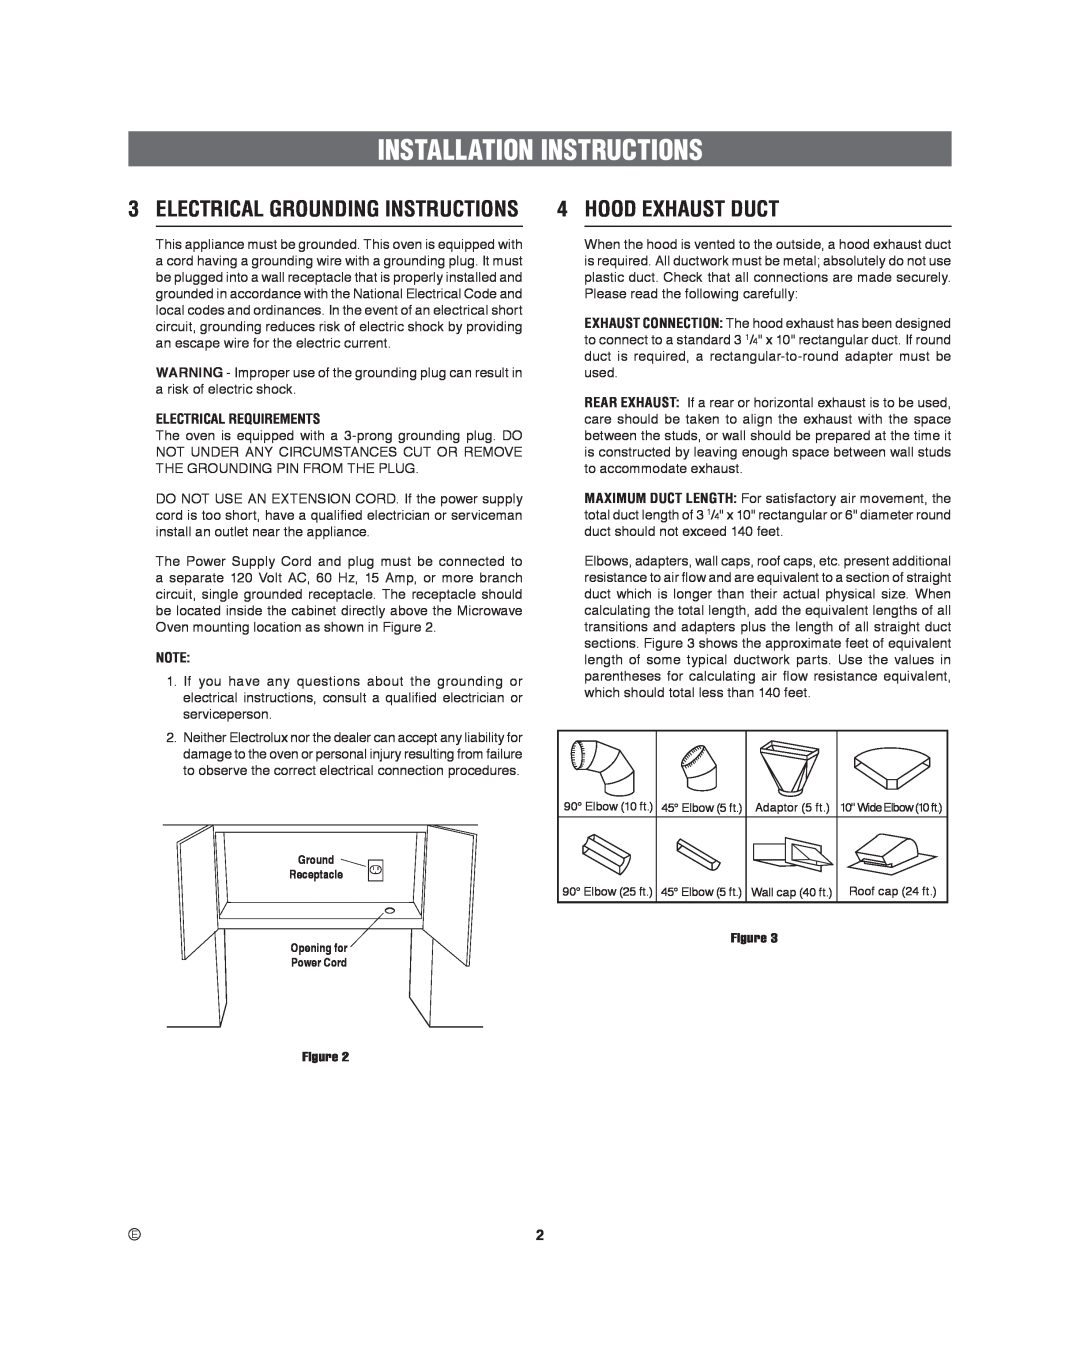 Frigidaire 316495060 manual Installation Instructions, Hood Exhaust Duct, Electrical Grounding Instructions 